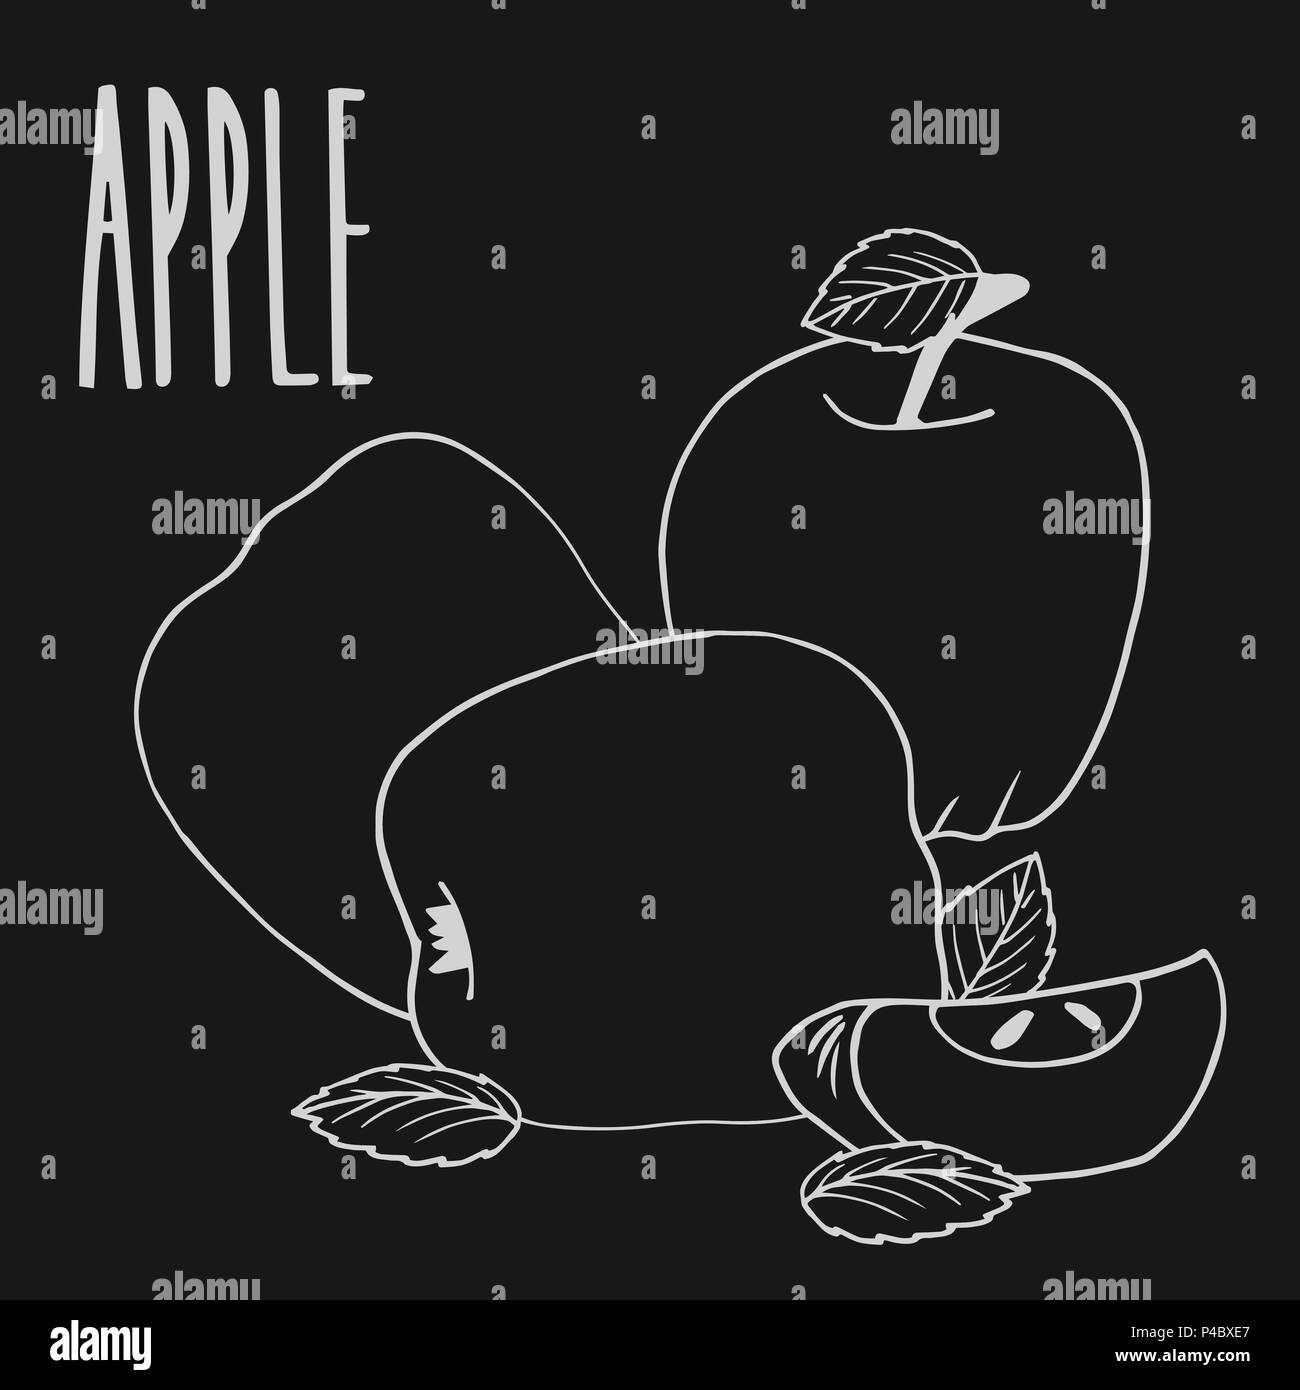 wok clipart black and white apple